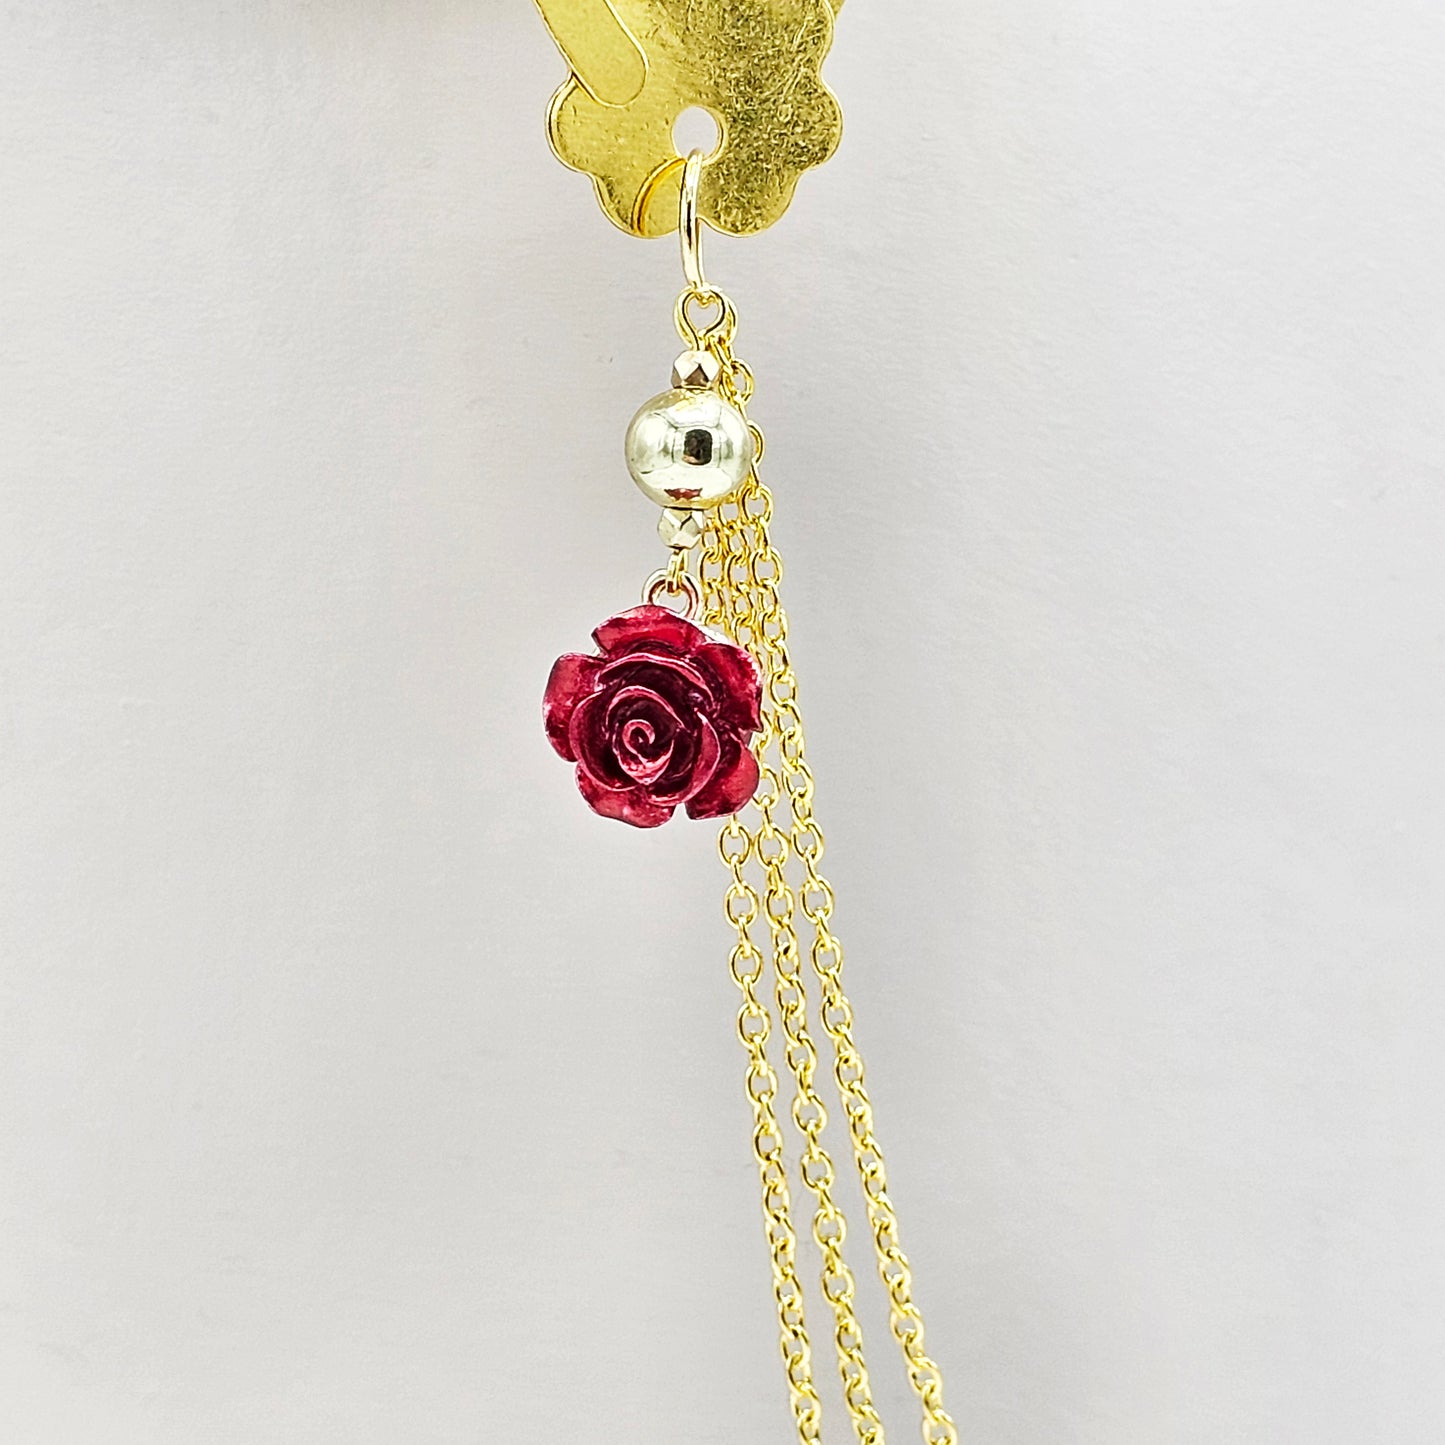 Gold Clover Clamps with Multi Chains Attached and Red Roses.